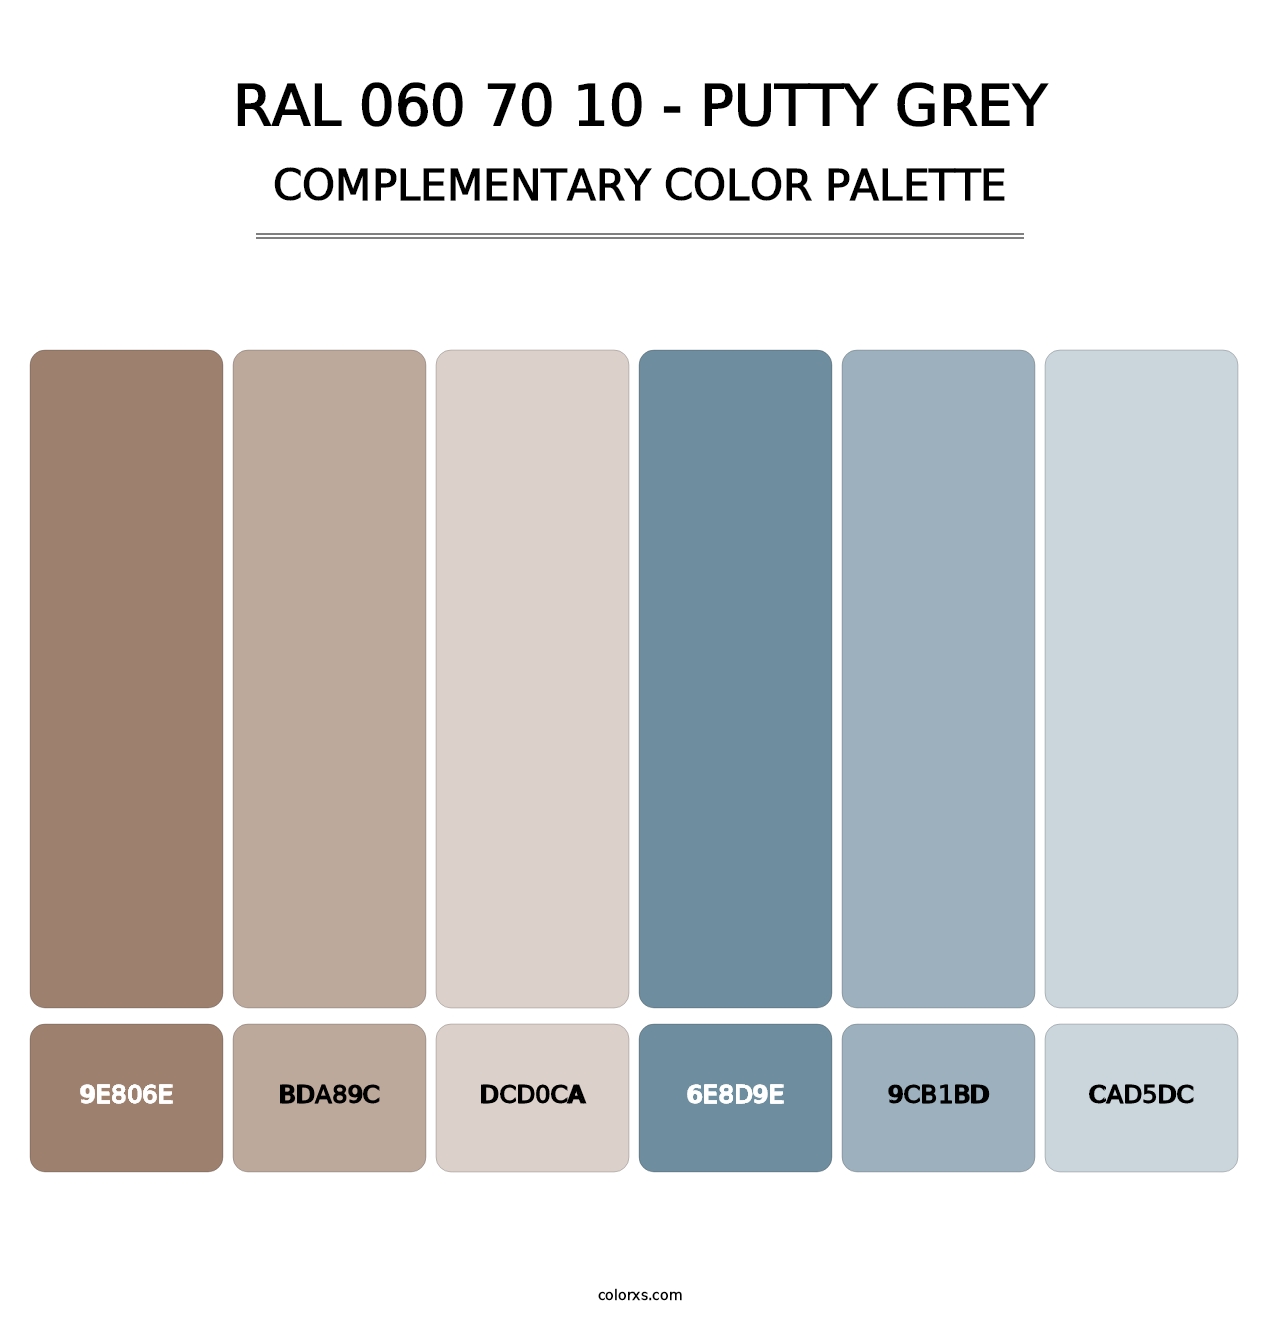 RAL 060 70 10 - Putty Grey - Complementary Color Palette